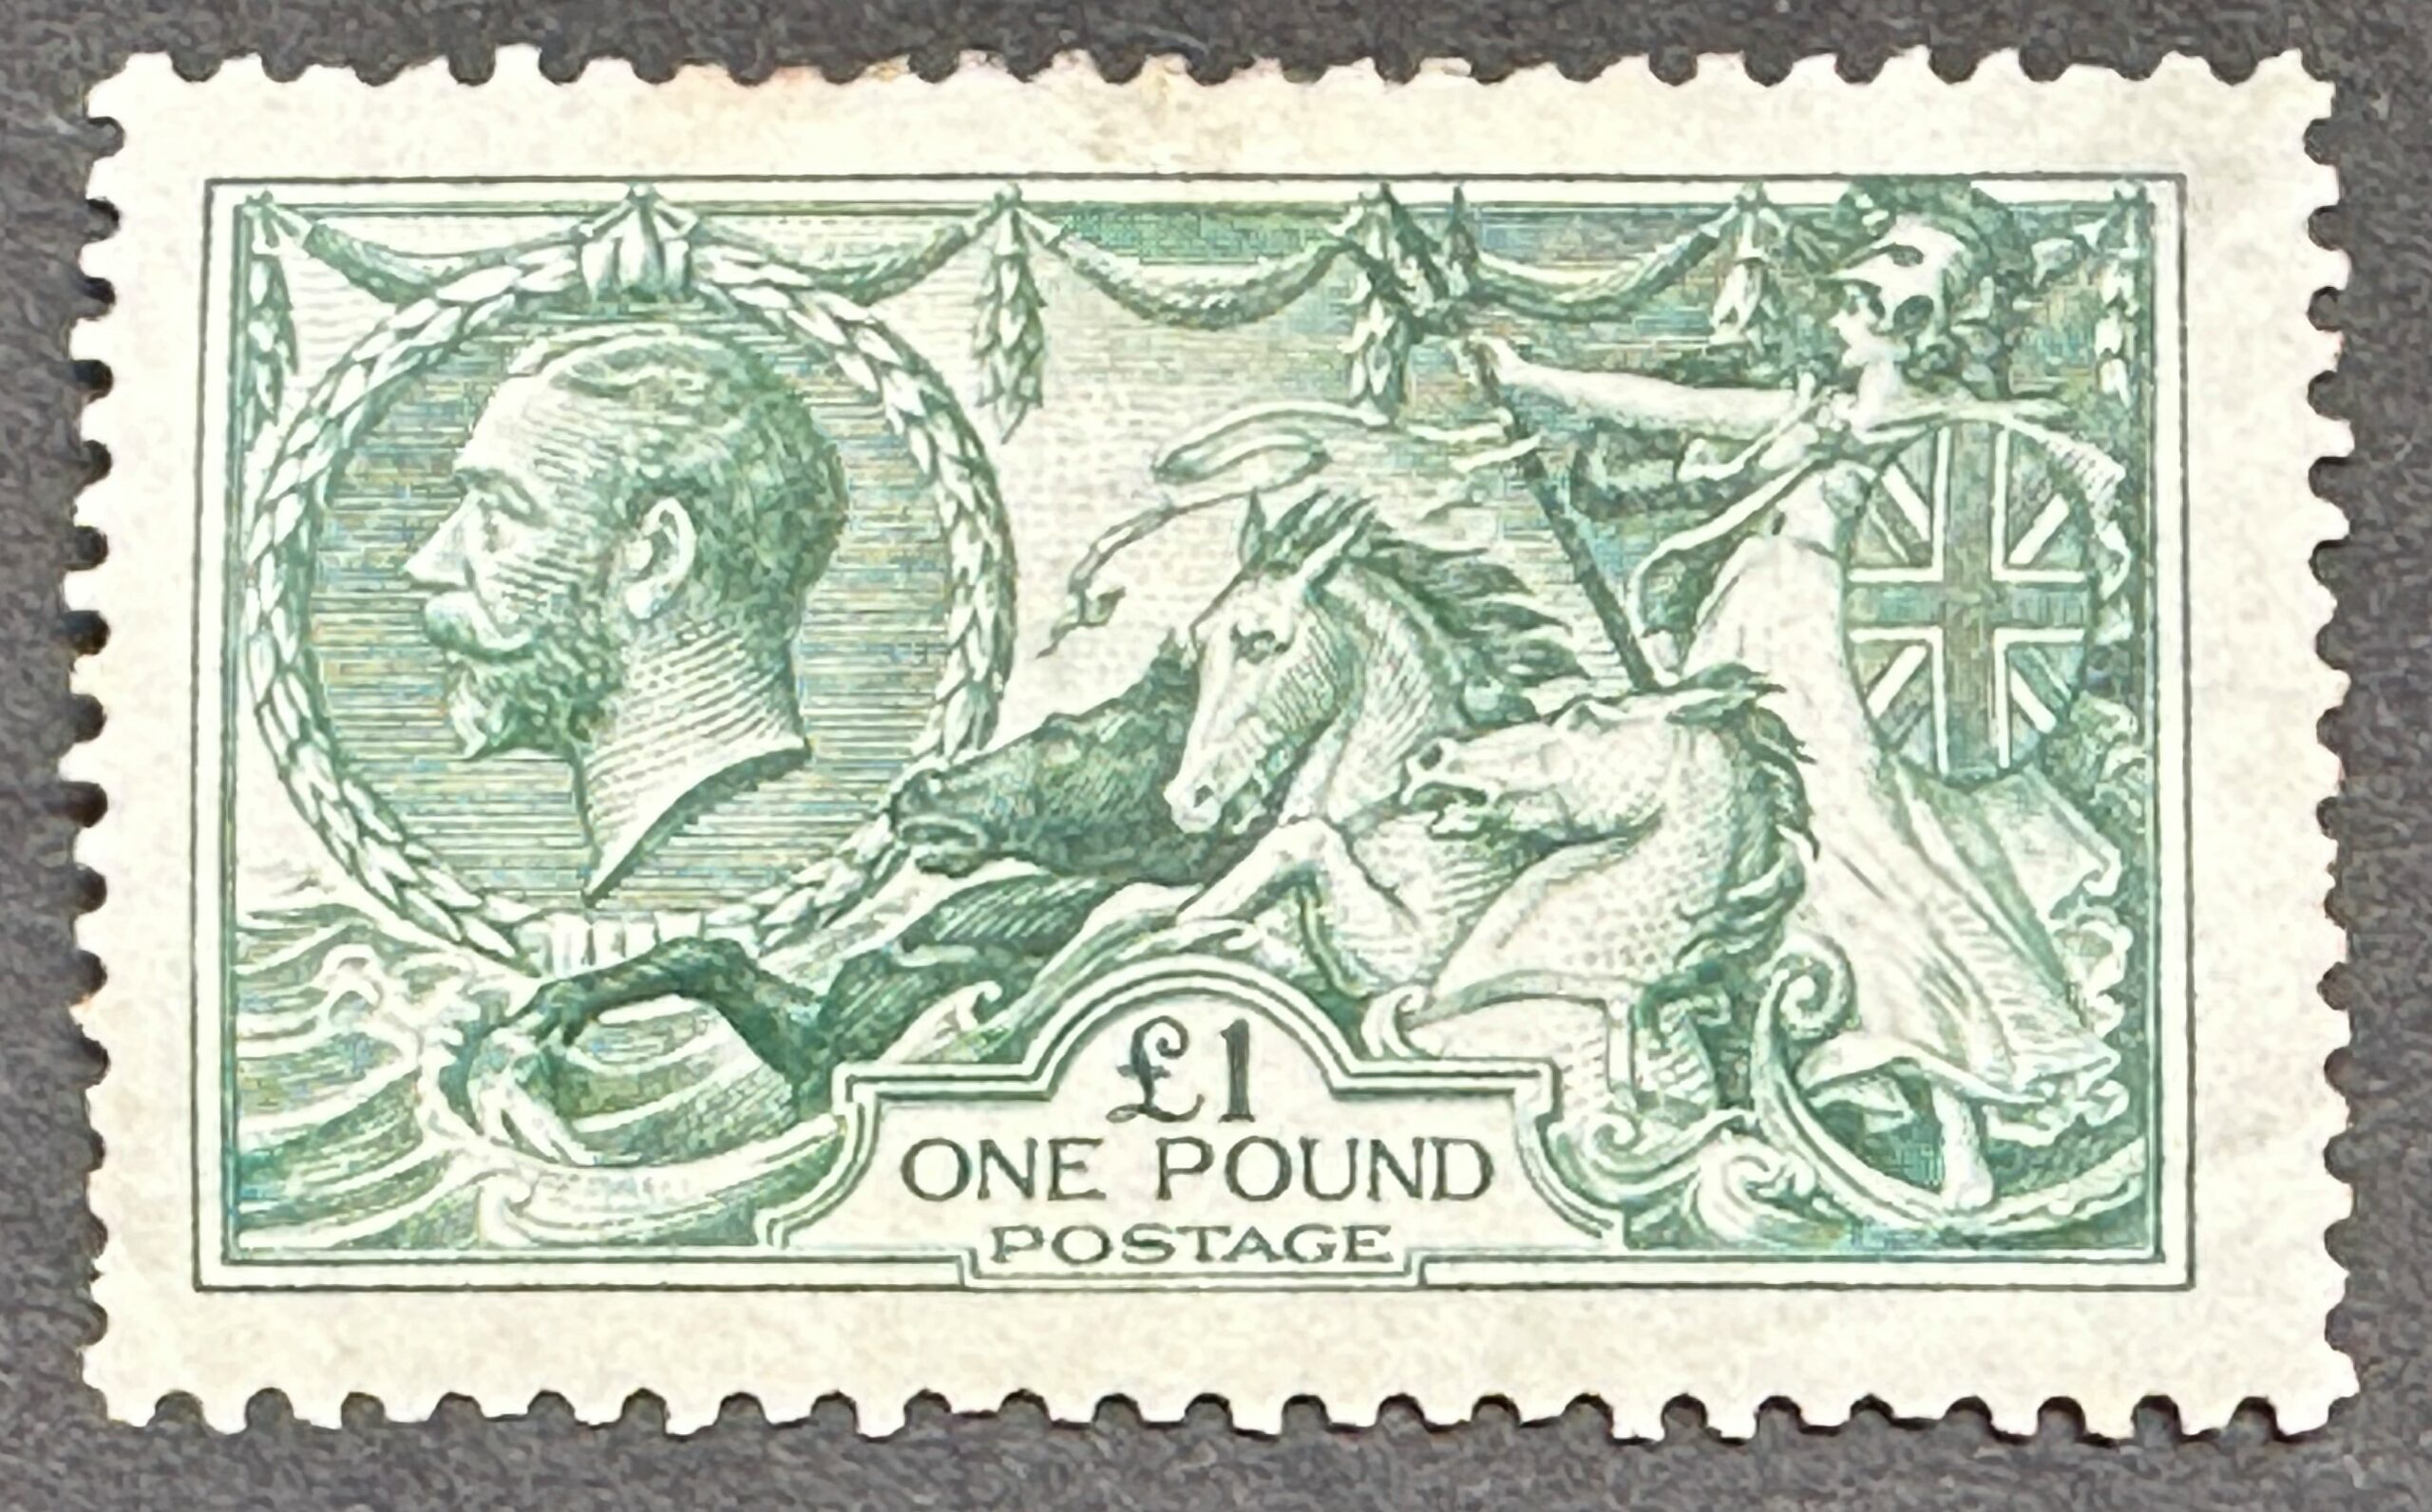 Great Britain GVR green Seahorses £1 stamp